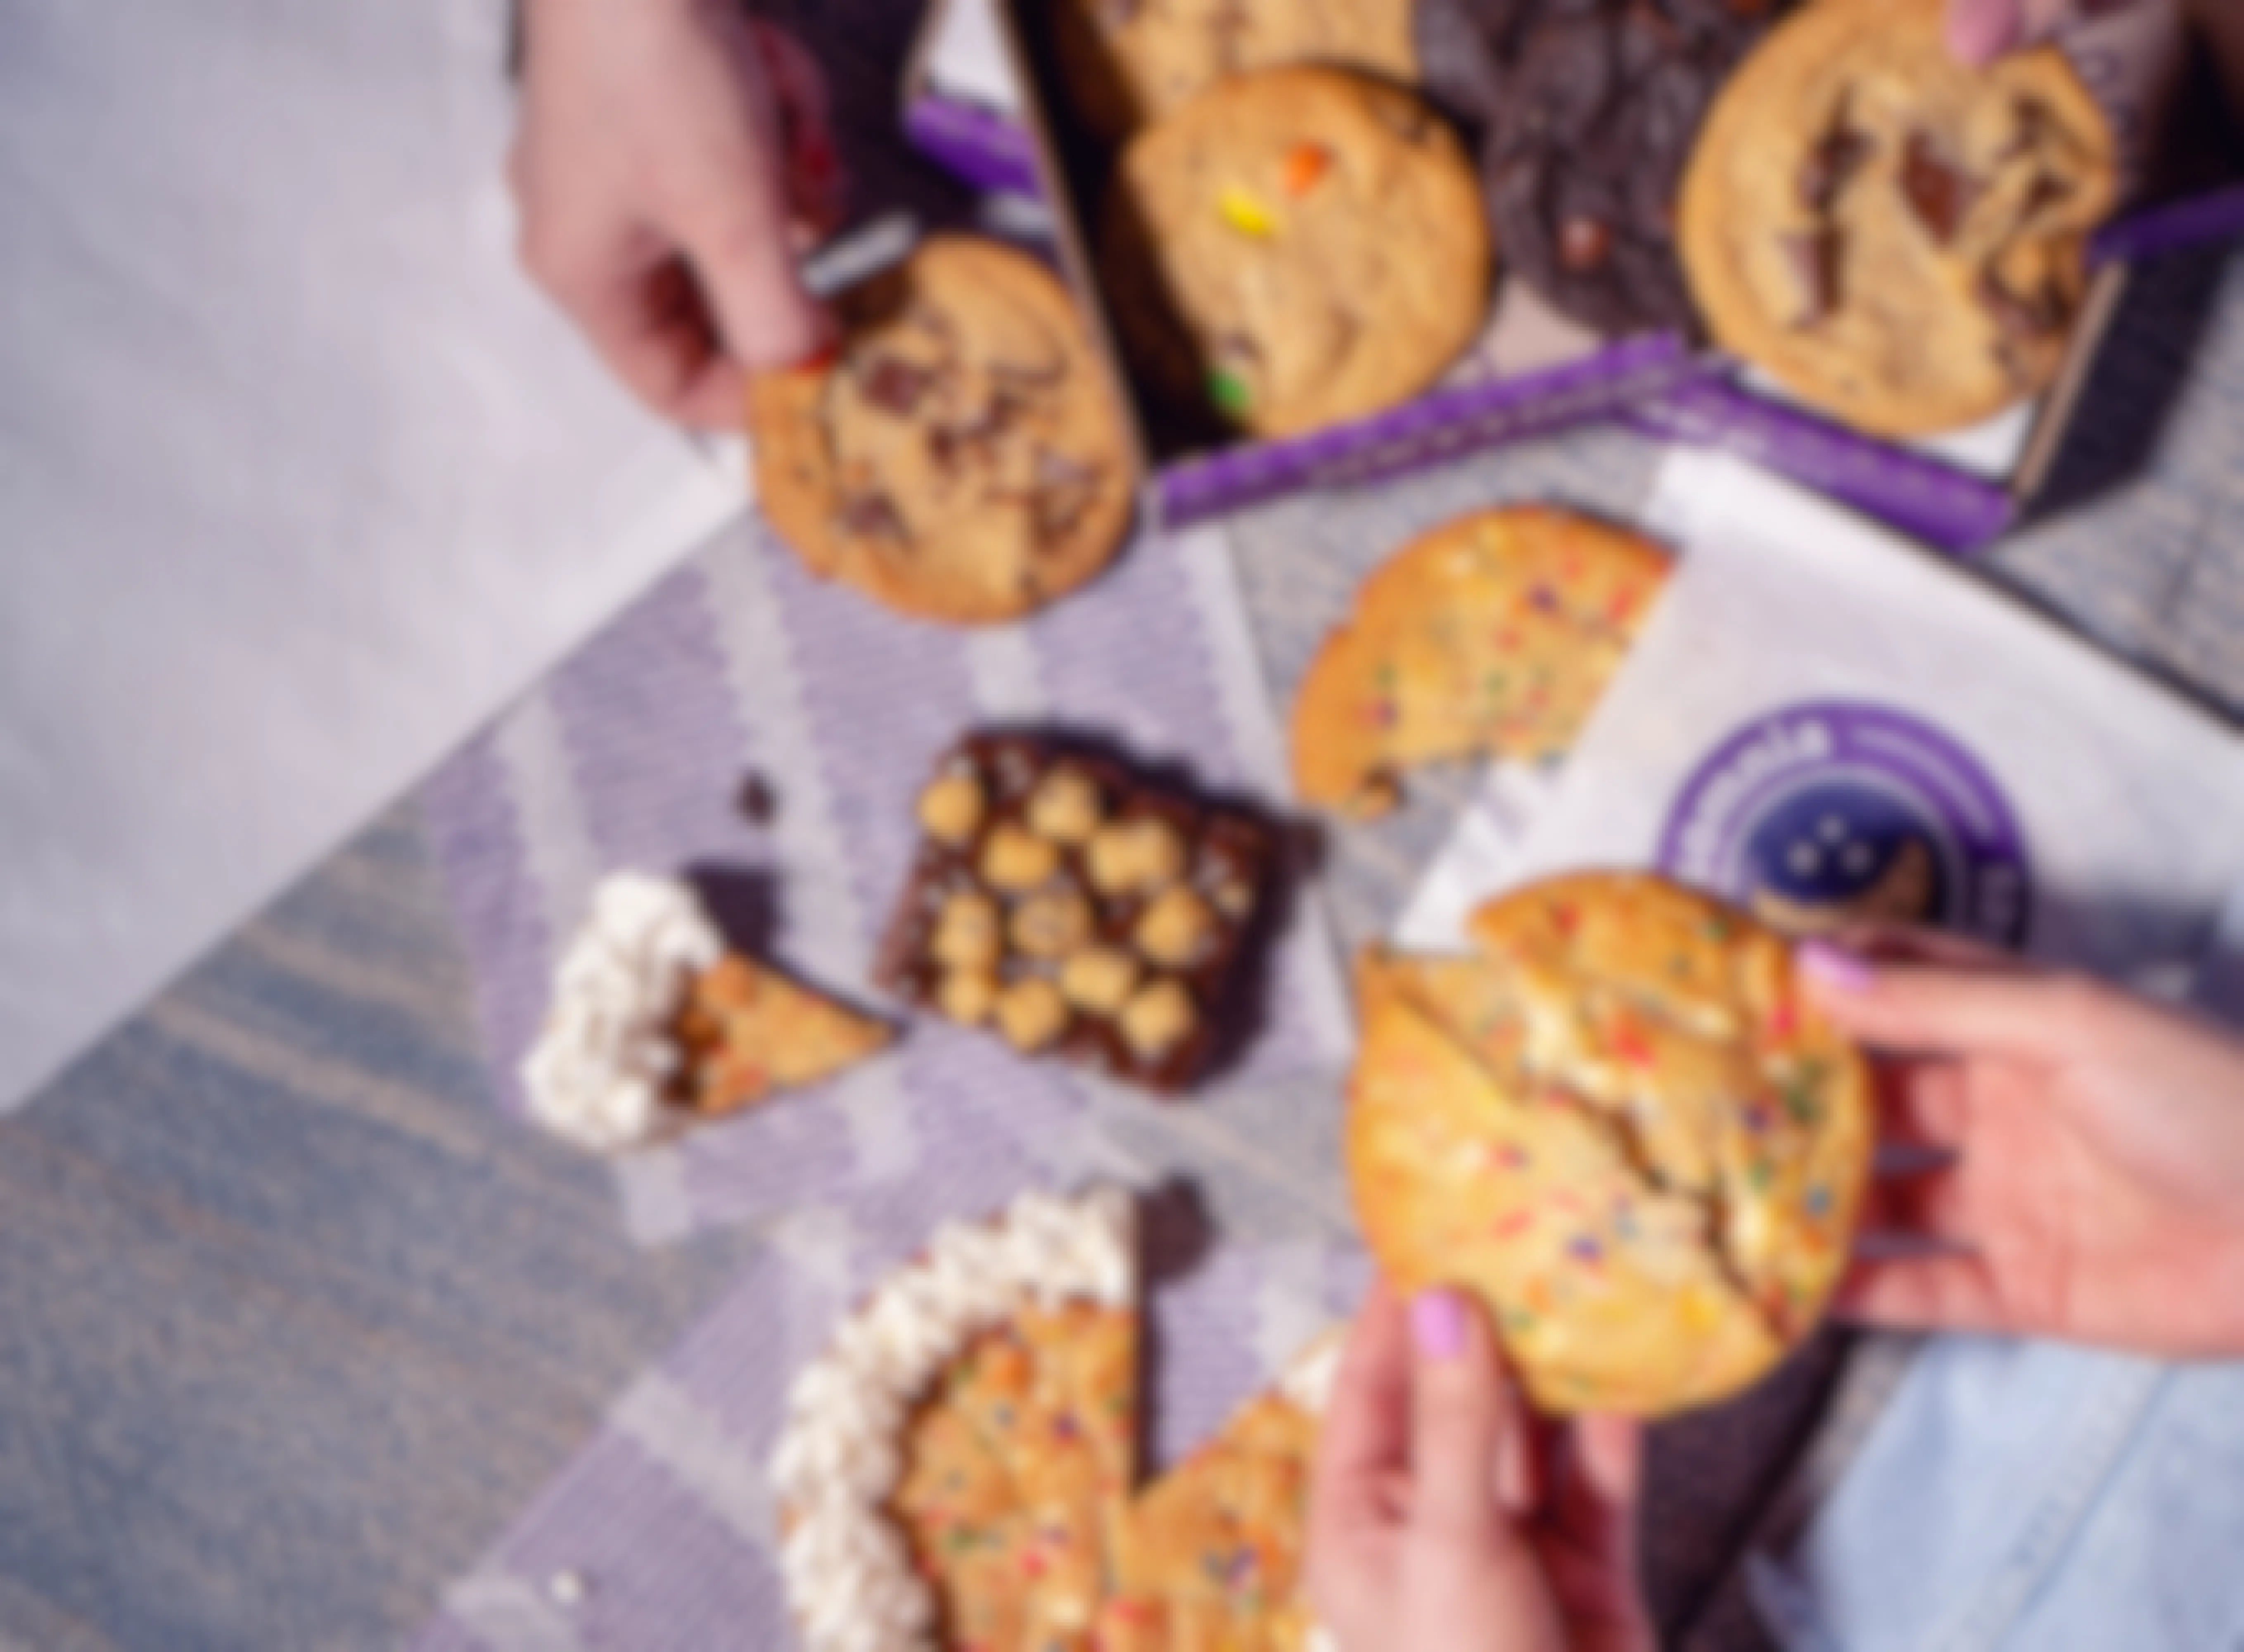 FREE 6-Pack of Insomnia Cookies for Students and Teachers With $5 Purchase